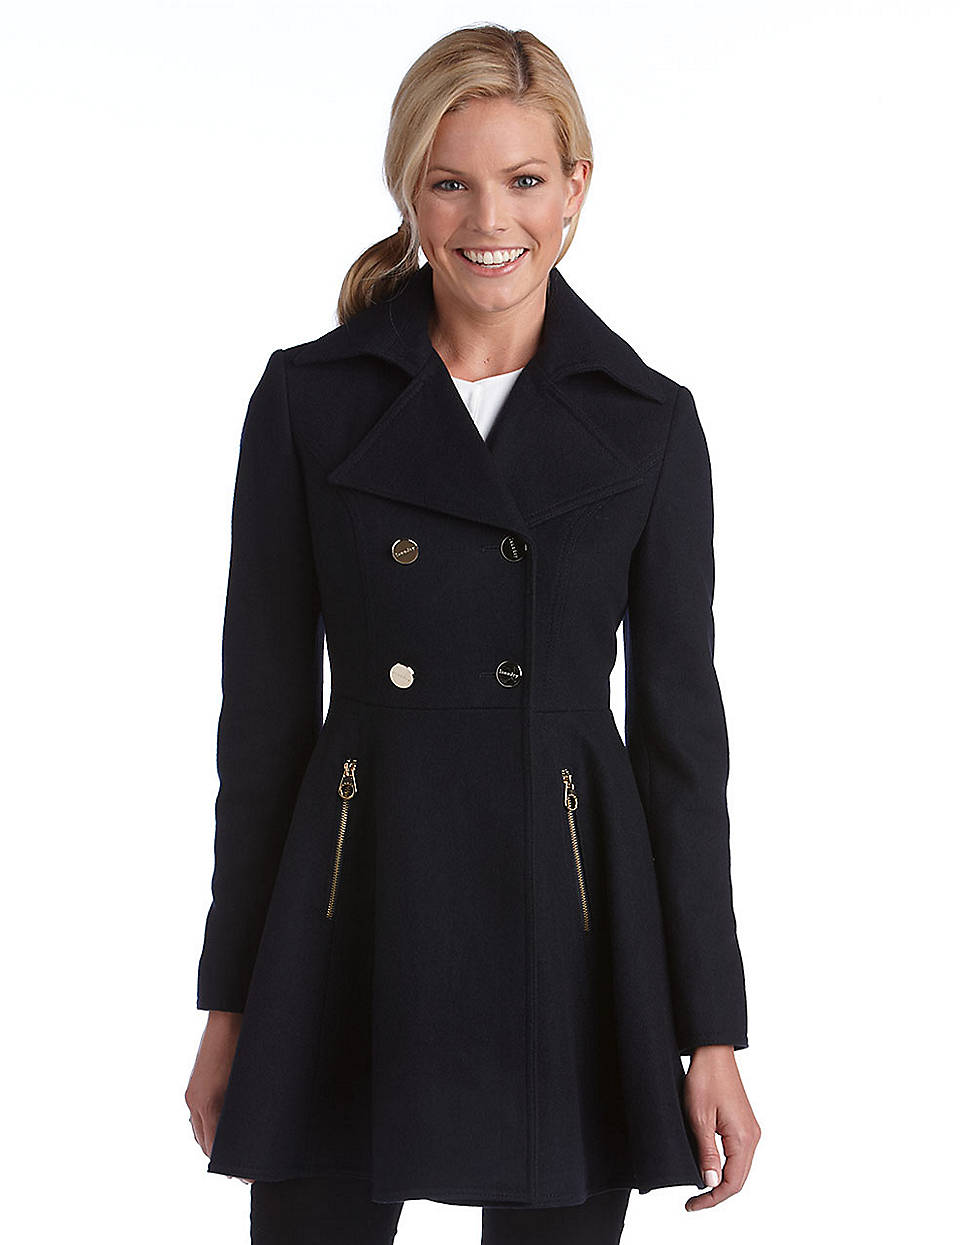 Lyst - Laundry By Shelli Segal Fit and Flare Coat in Black